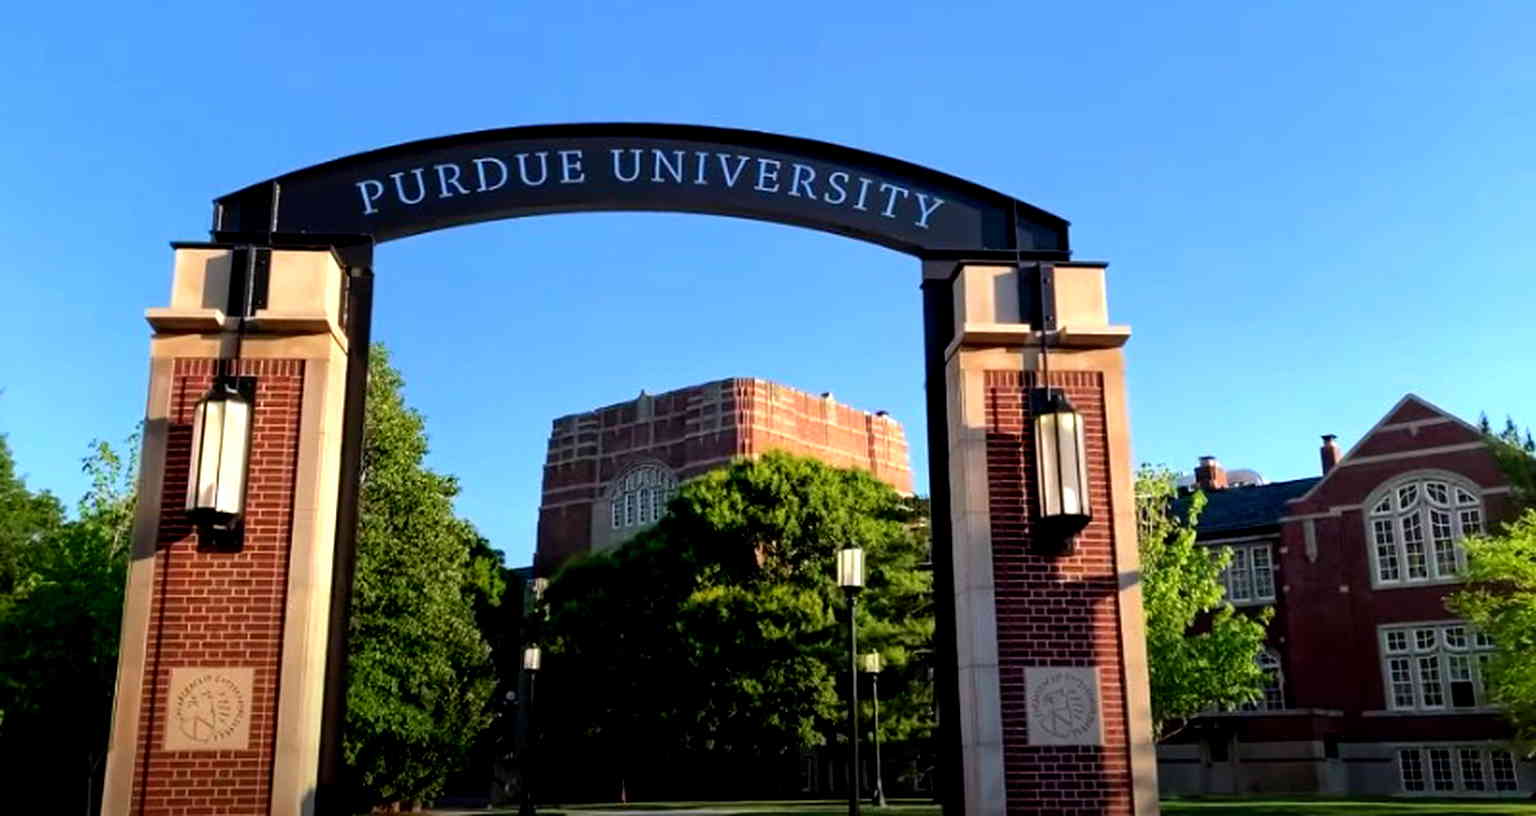 Chinese student who praised Tiananmen Square protestors was harassed by other Chinese students at Purdue